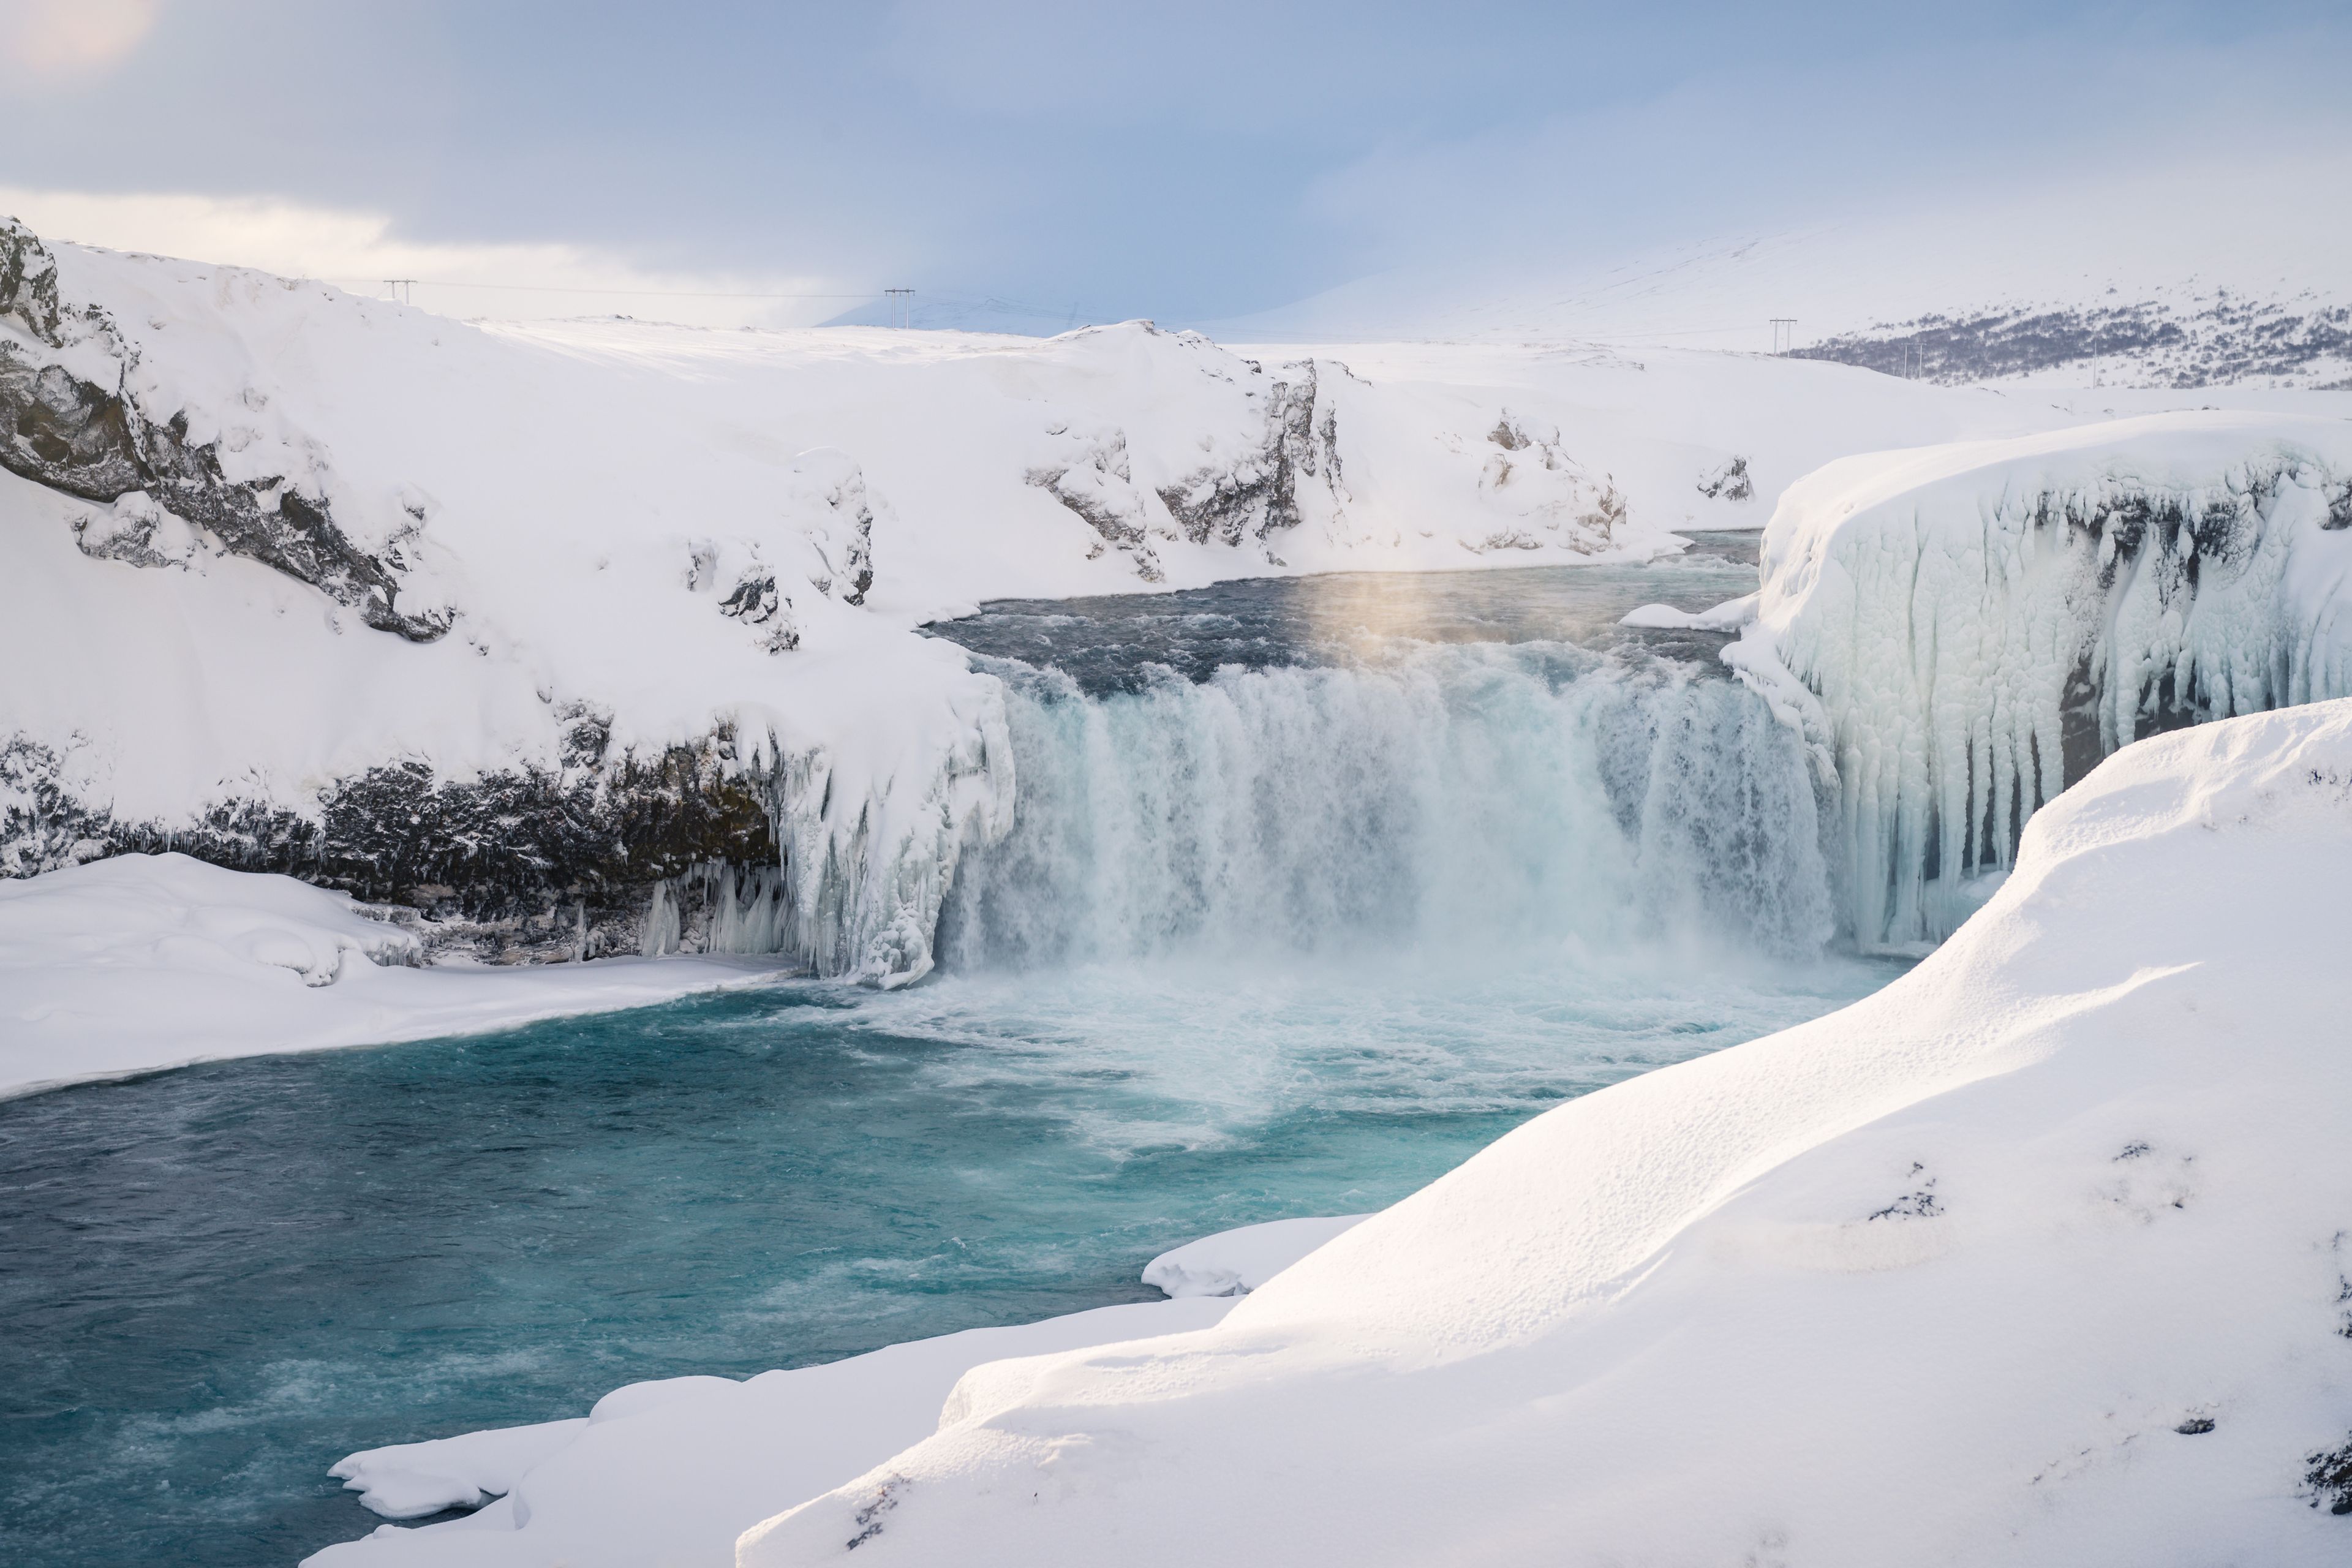 A picture of godafoss waterfall with snow during a warm day. Amazing experience for anyone coming to iceland.